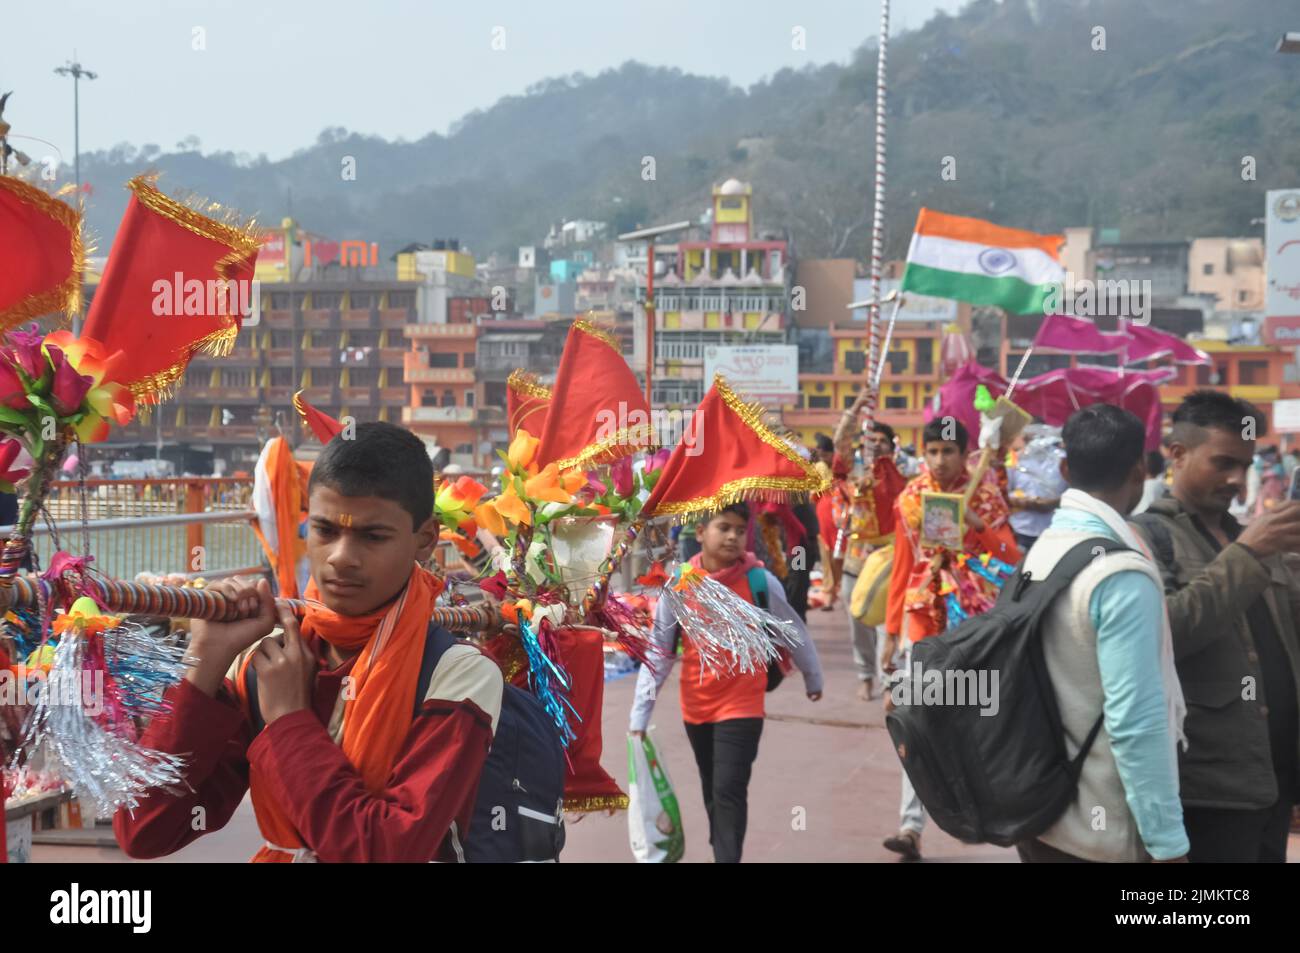 Haridwar, Uttarakhand, India - 02 25 2022: Maha Shivratri - People visiting to join Kavad or Kanwar (kanvar) Yatra which is annual pilgrimage journey of Lord Shiva’s devotees. Stock Photo